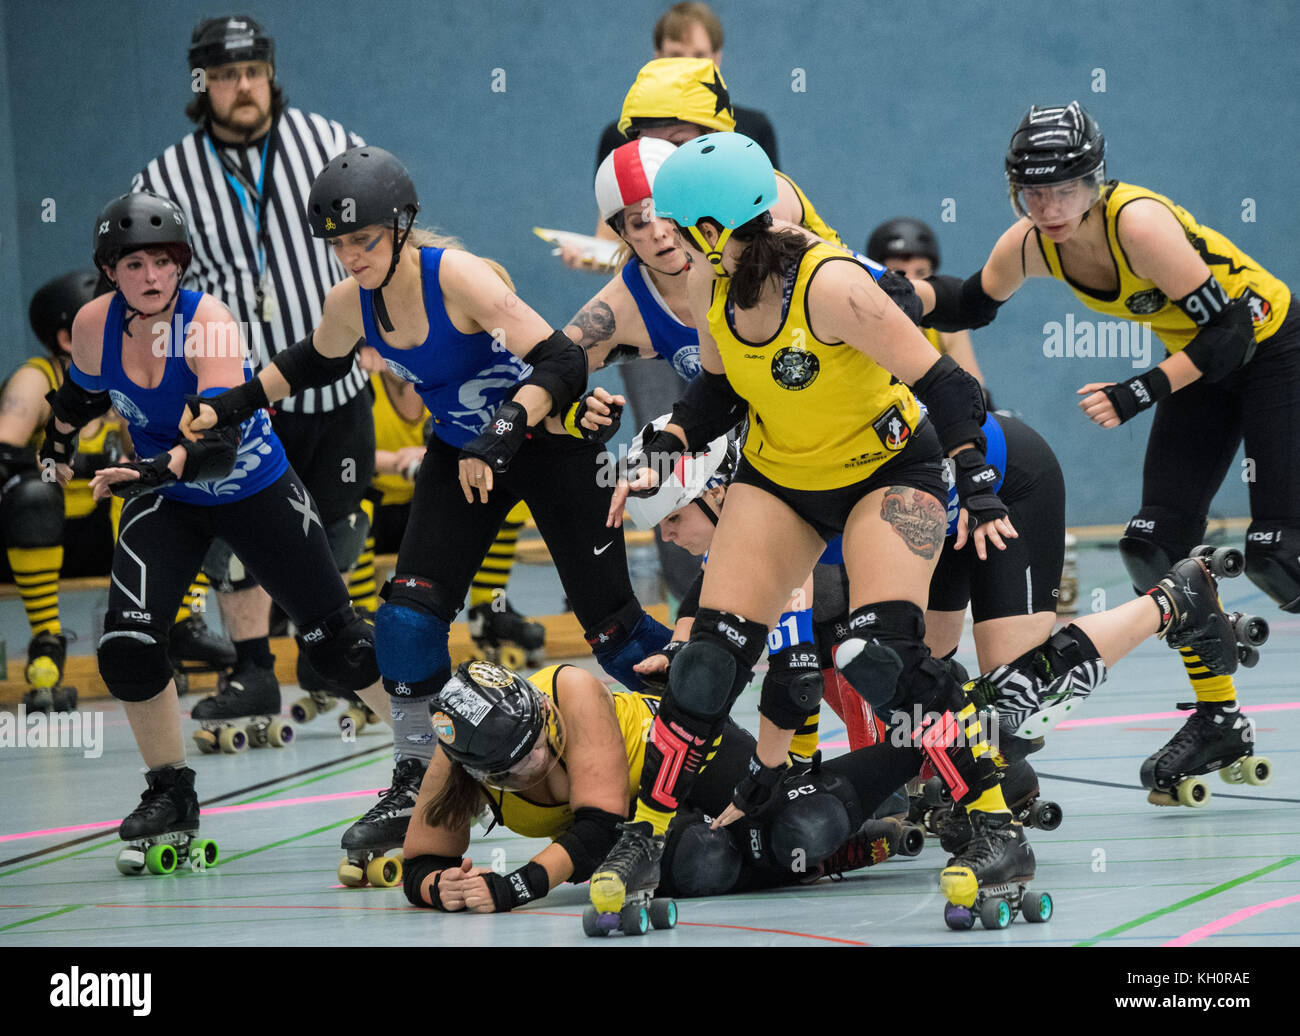 A player (yellow jersey, RocKArollers) has fallen to the ground during a  mass confrontation with the Bembel Town Rollergirls (blue jersey,  Frankfurt) during the 2nd Bundesliga Roller Derby match between the Bembel